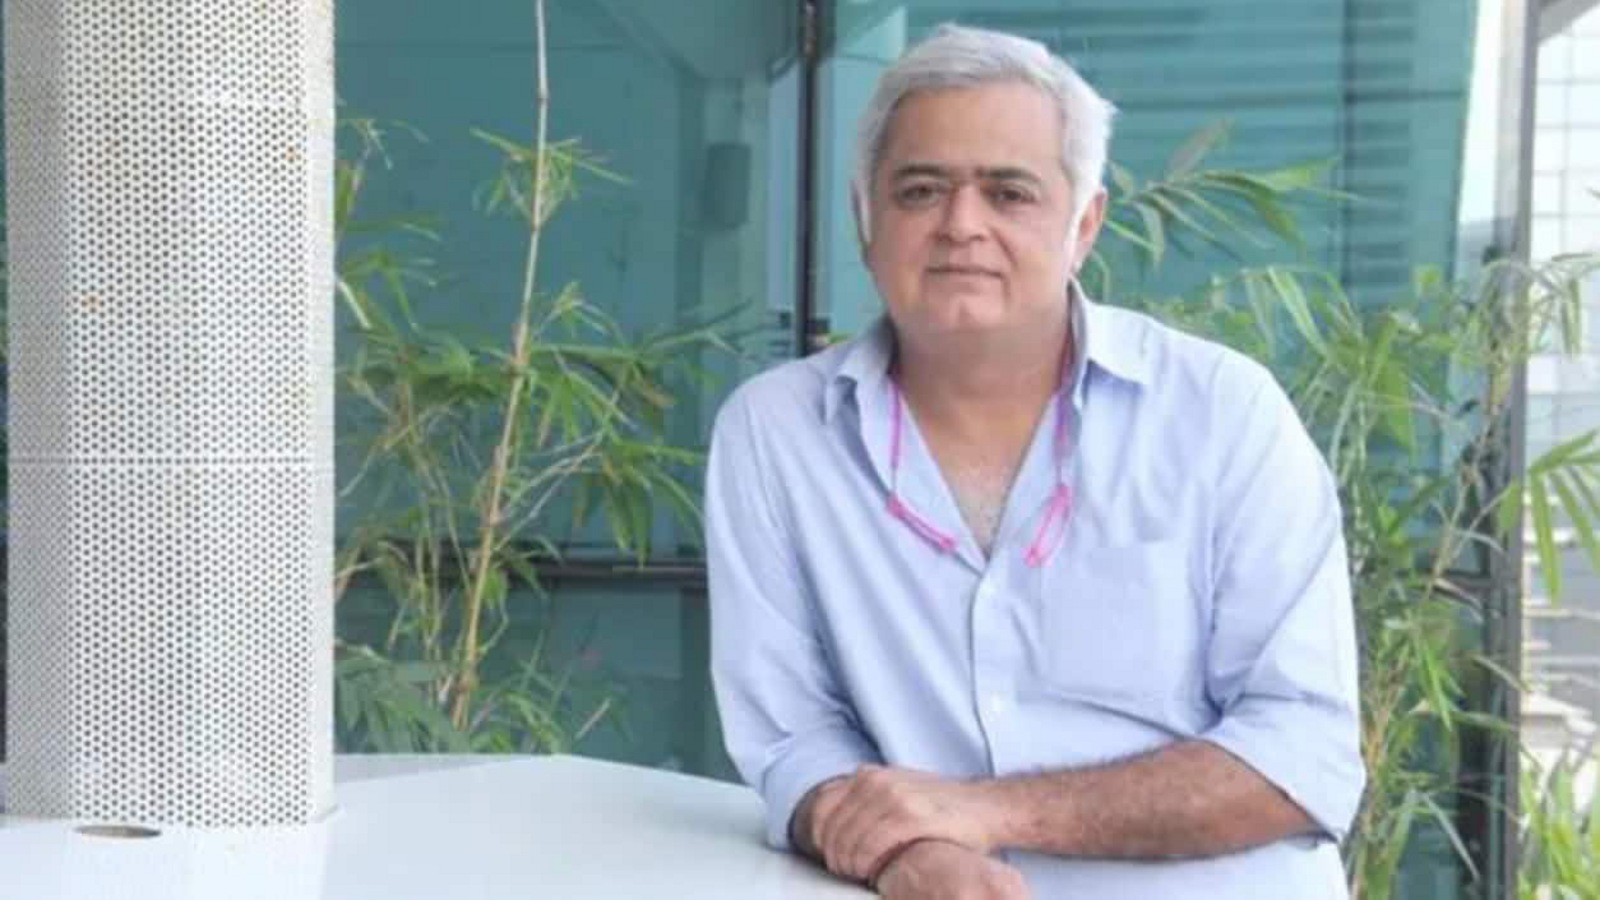 Director Hansal Mehta on fading liberal discourse and his film Faraaz: ‘Cynicism and fear have taken over’